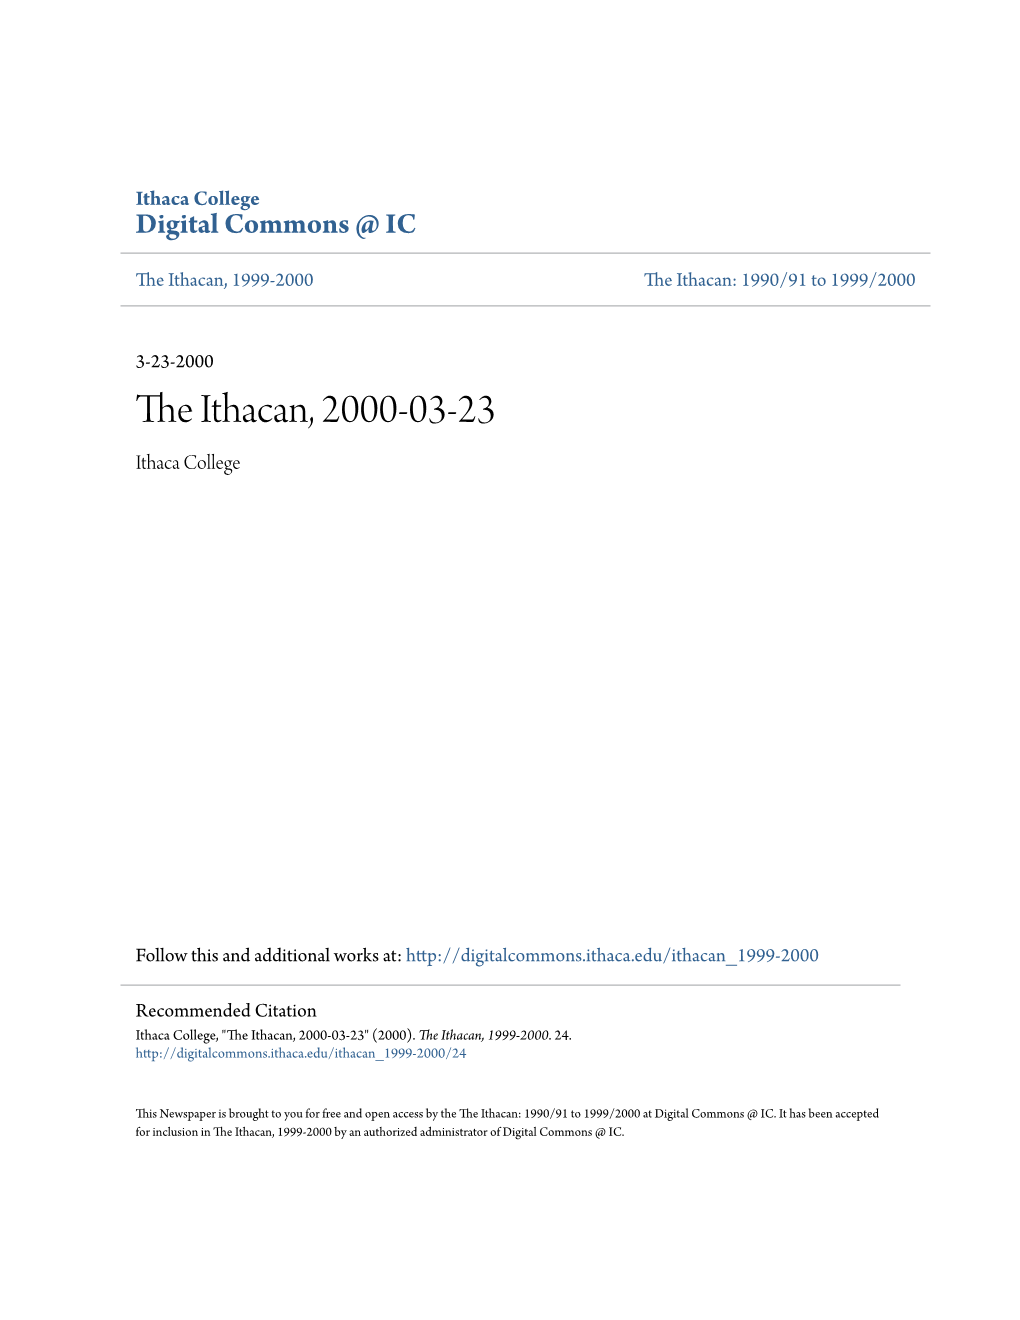 The Ithacan, 2000-03-23